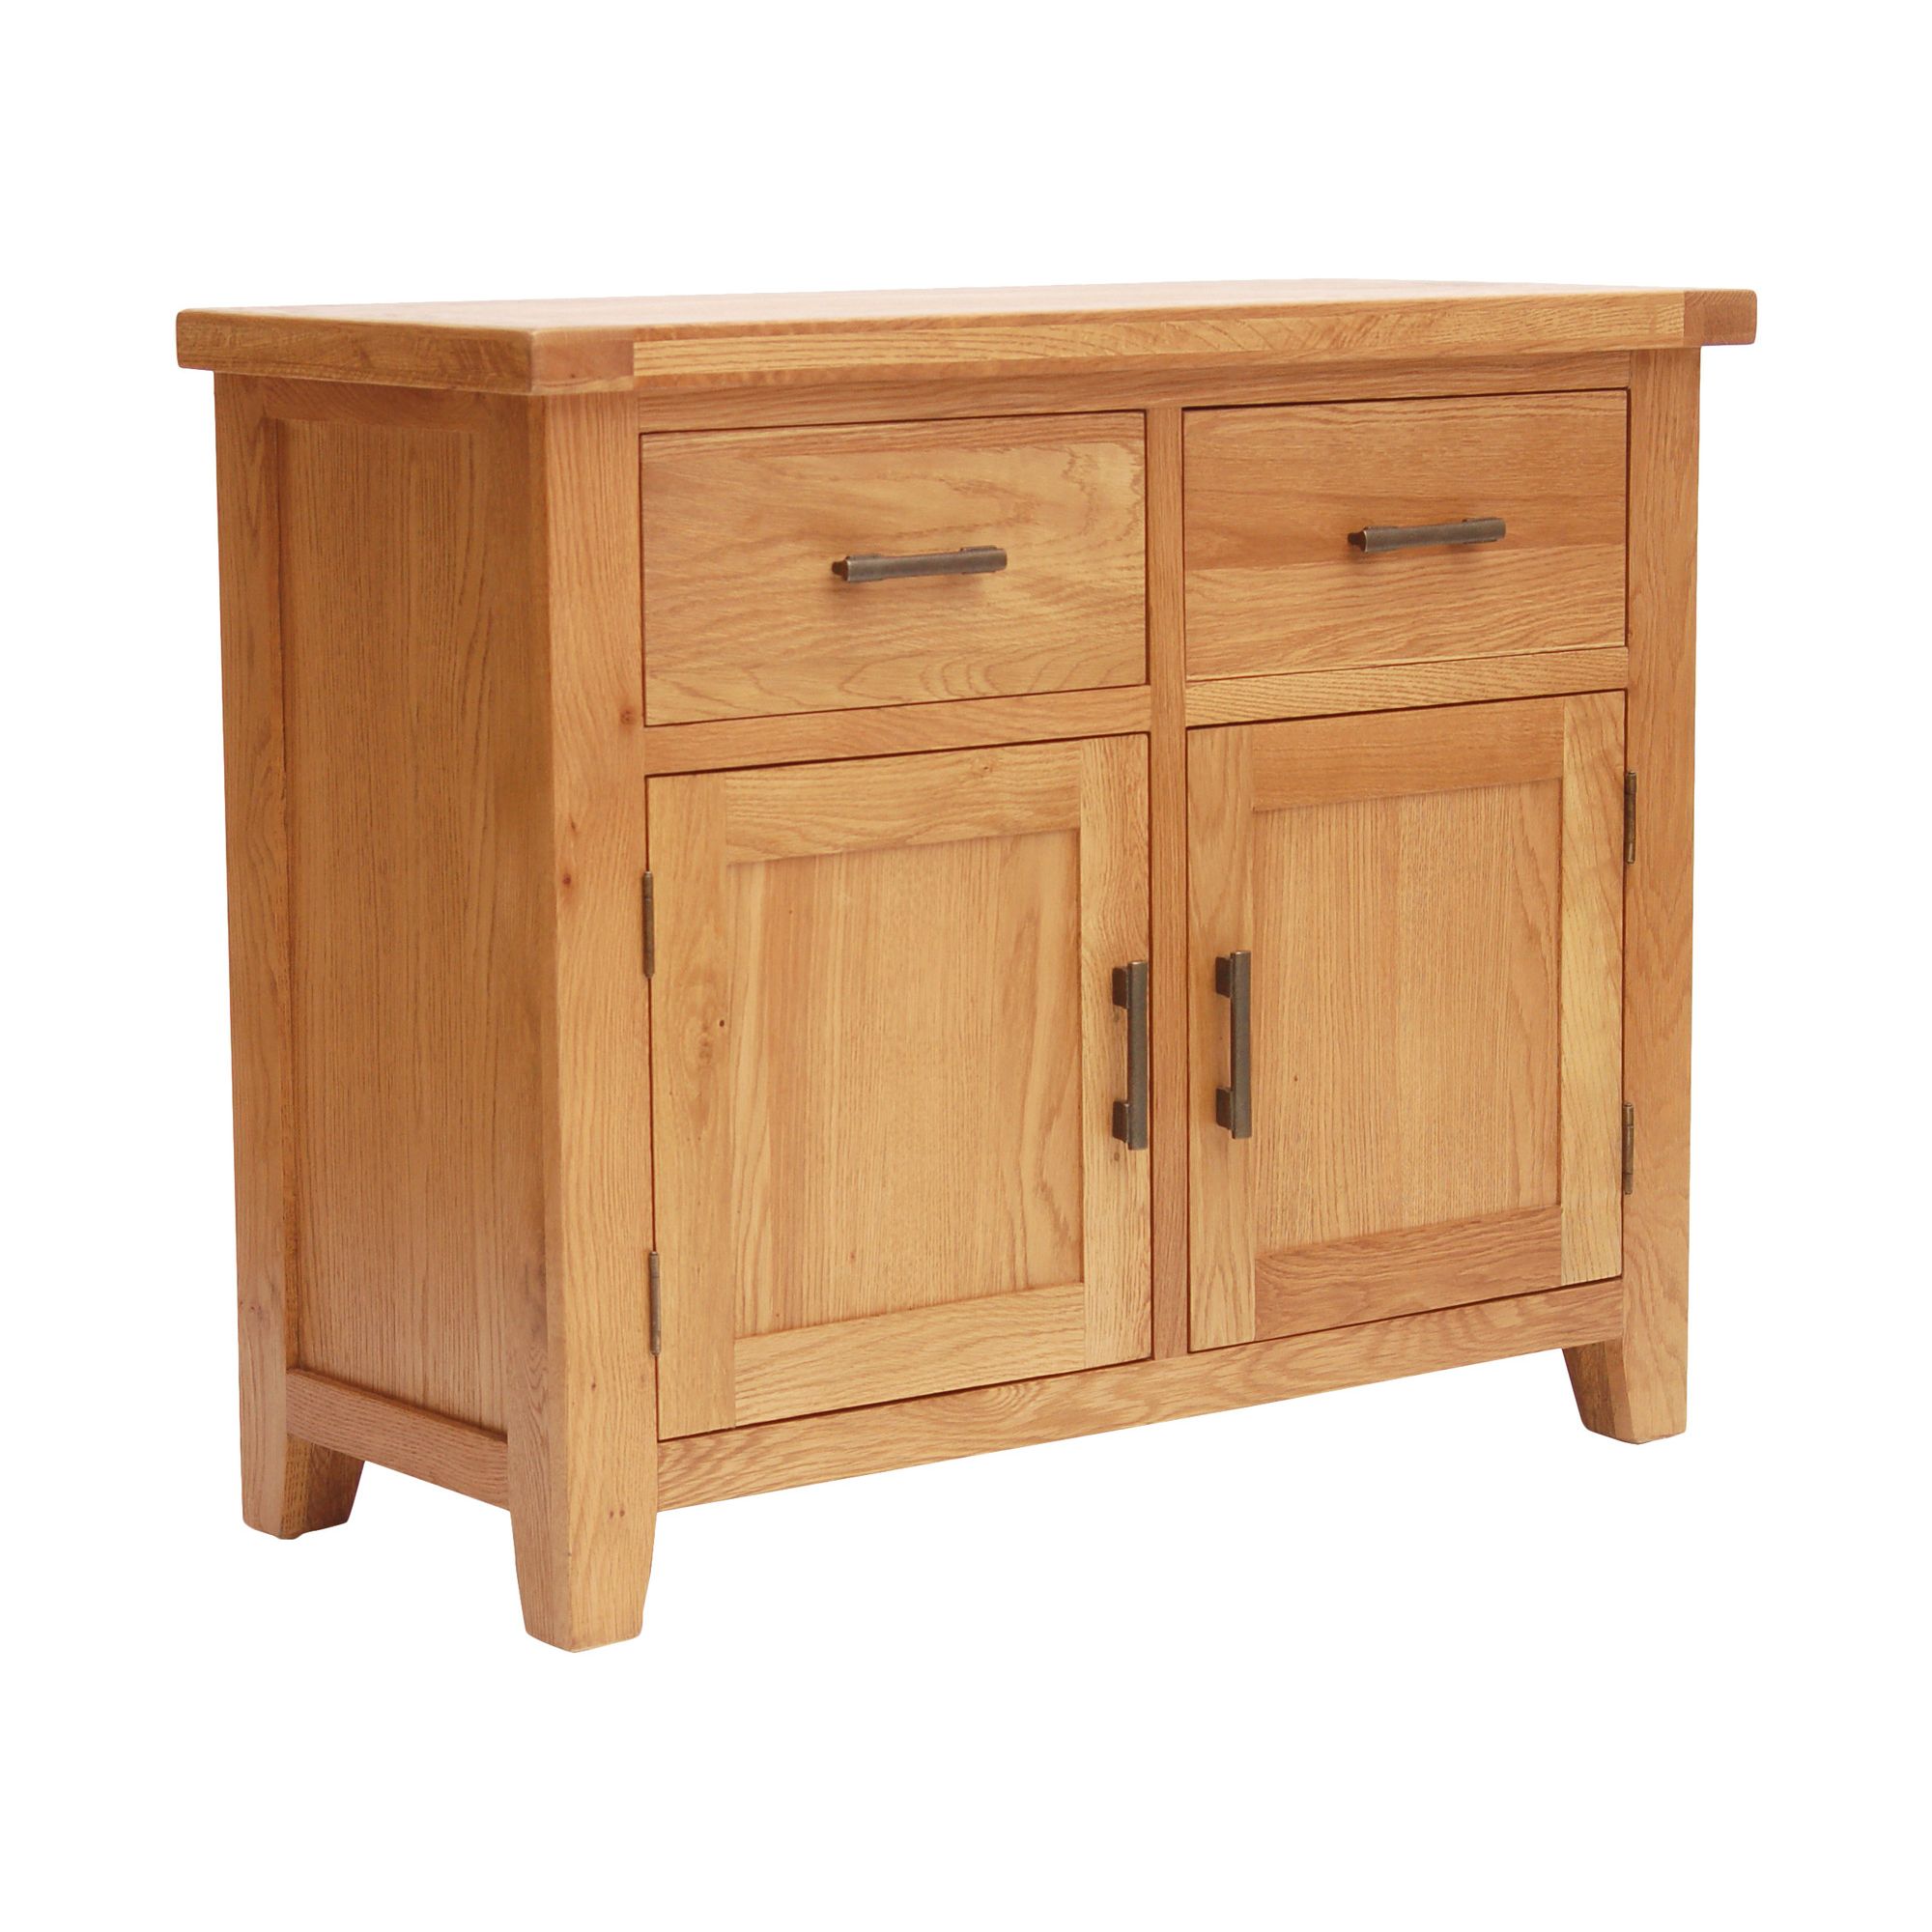 Furniture Link Hampshire Small Sideboard at Tesco Direct